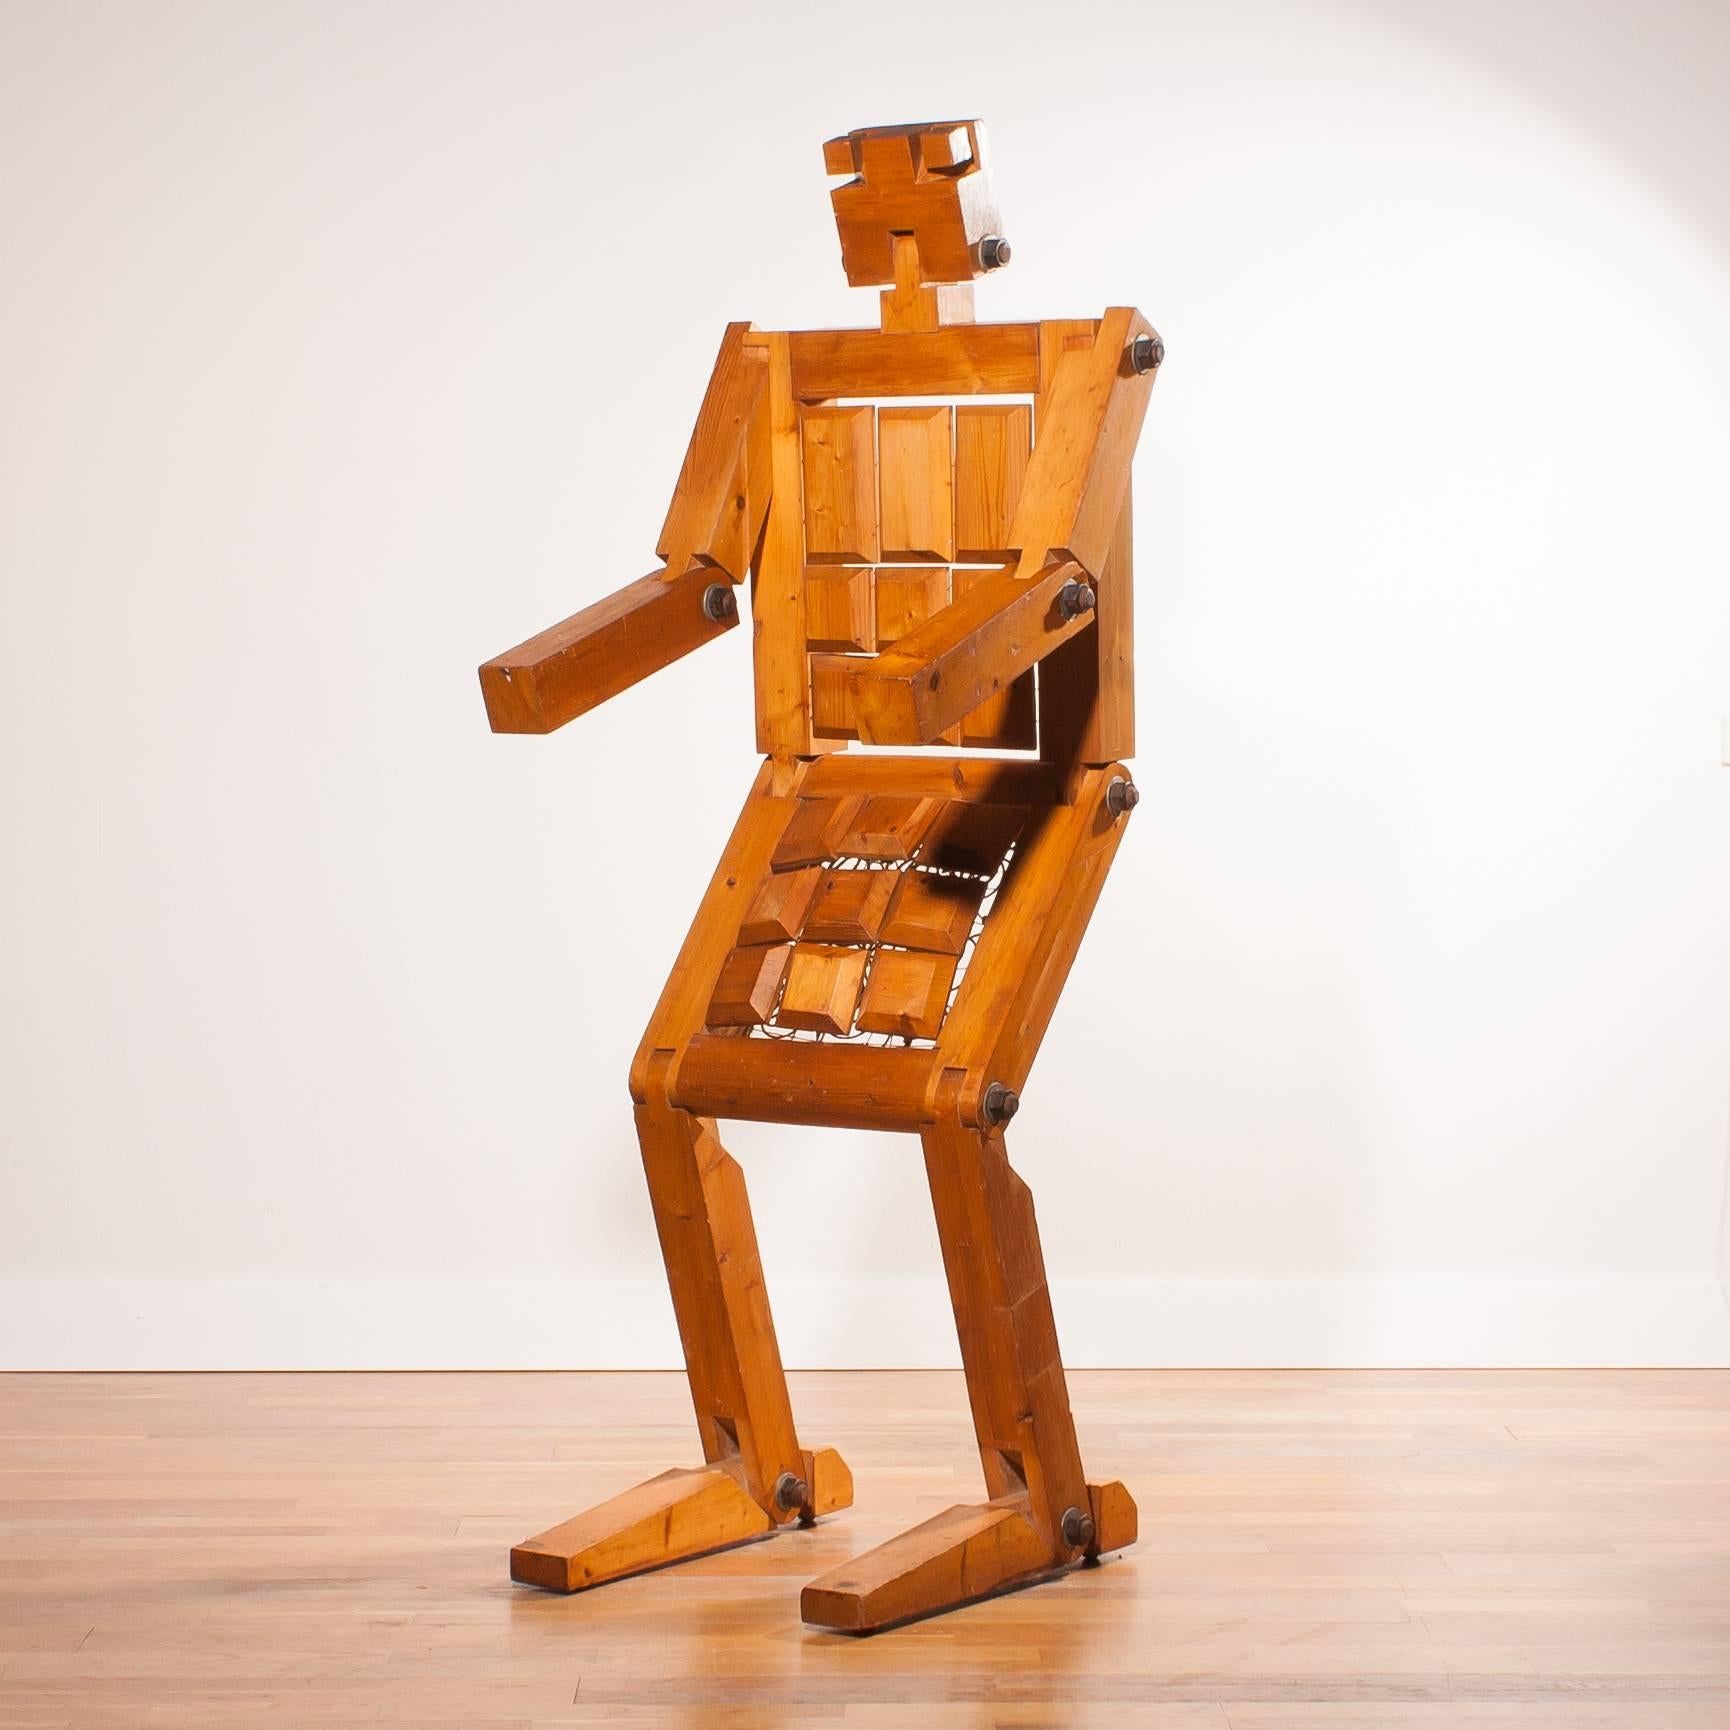 Really an 'eyecatcher' this robot chair.
The chair is signed with 'Bielke 77'.
It is made of pinewood within the back and seat large solid springs and secured with large bolts.
The robot can also stand and is then 180 cm high.
A great decorative